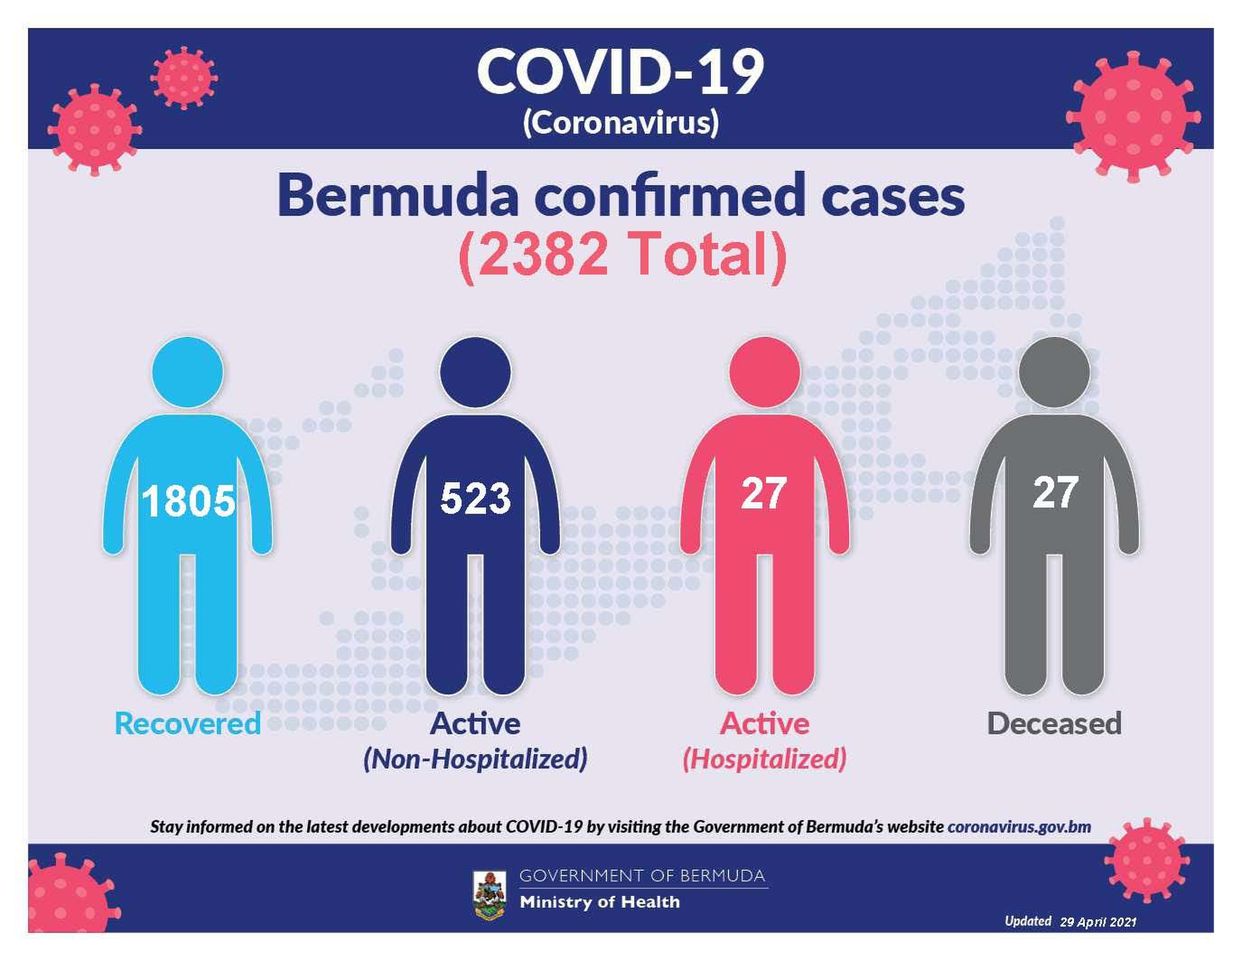 3 new deaths and 8 COVID-19 cases reported in Bermuda, 29 April